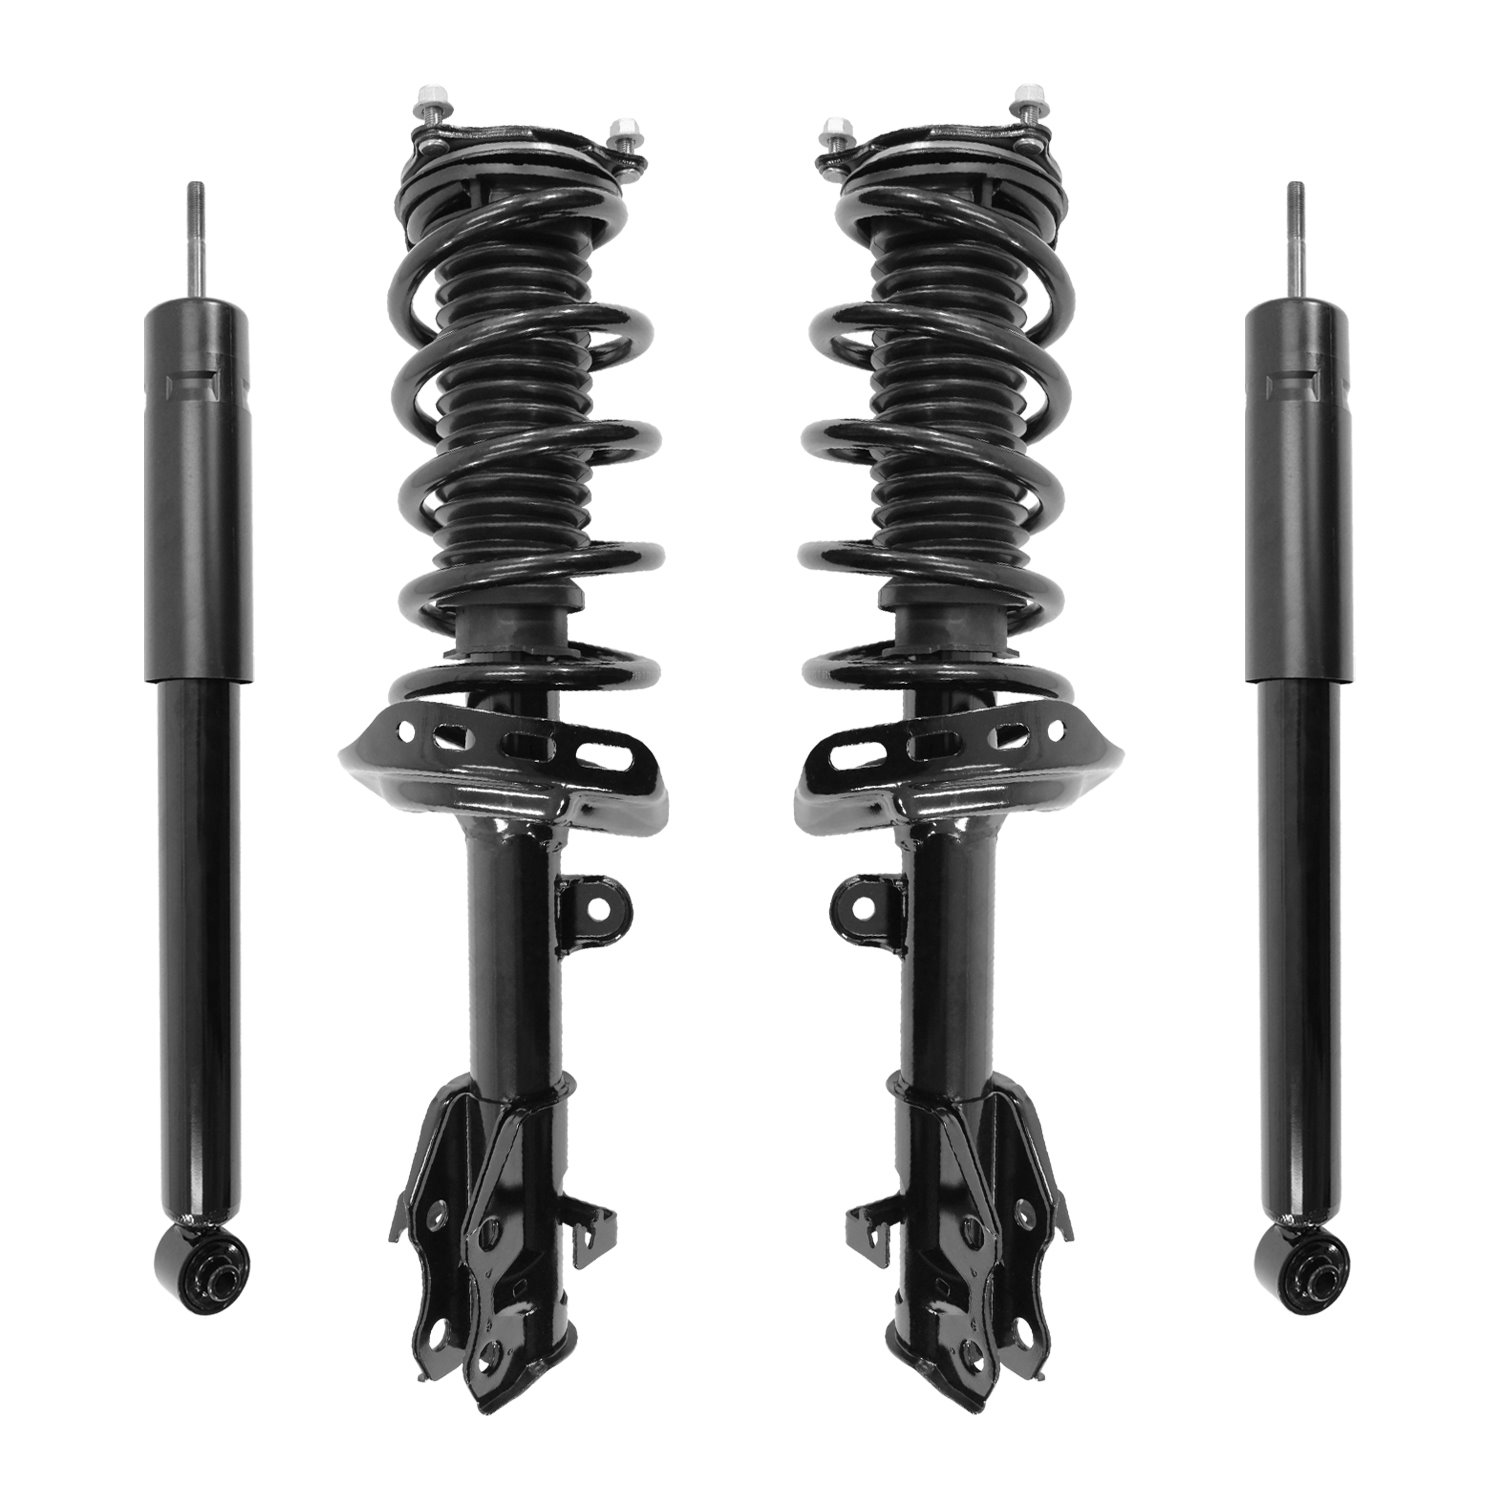 4-13261-259390-001 Front & Rear Complete Strut Assembly Shock Absorber Kit Fits Select Acura RDX